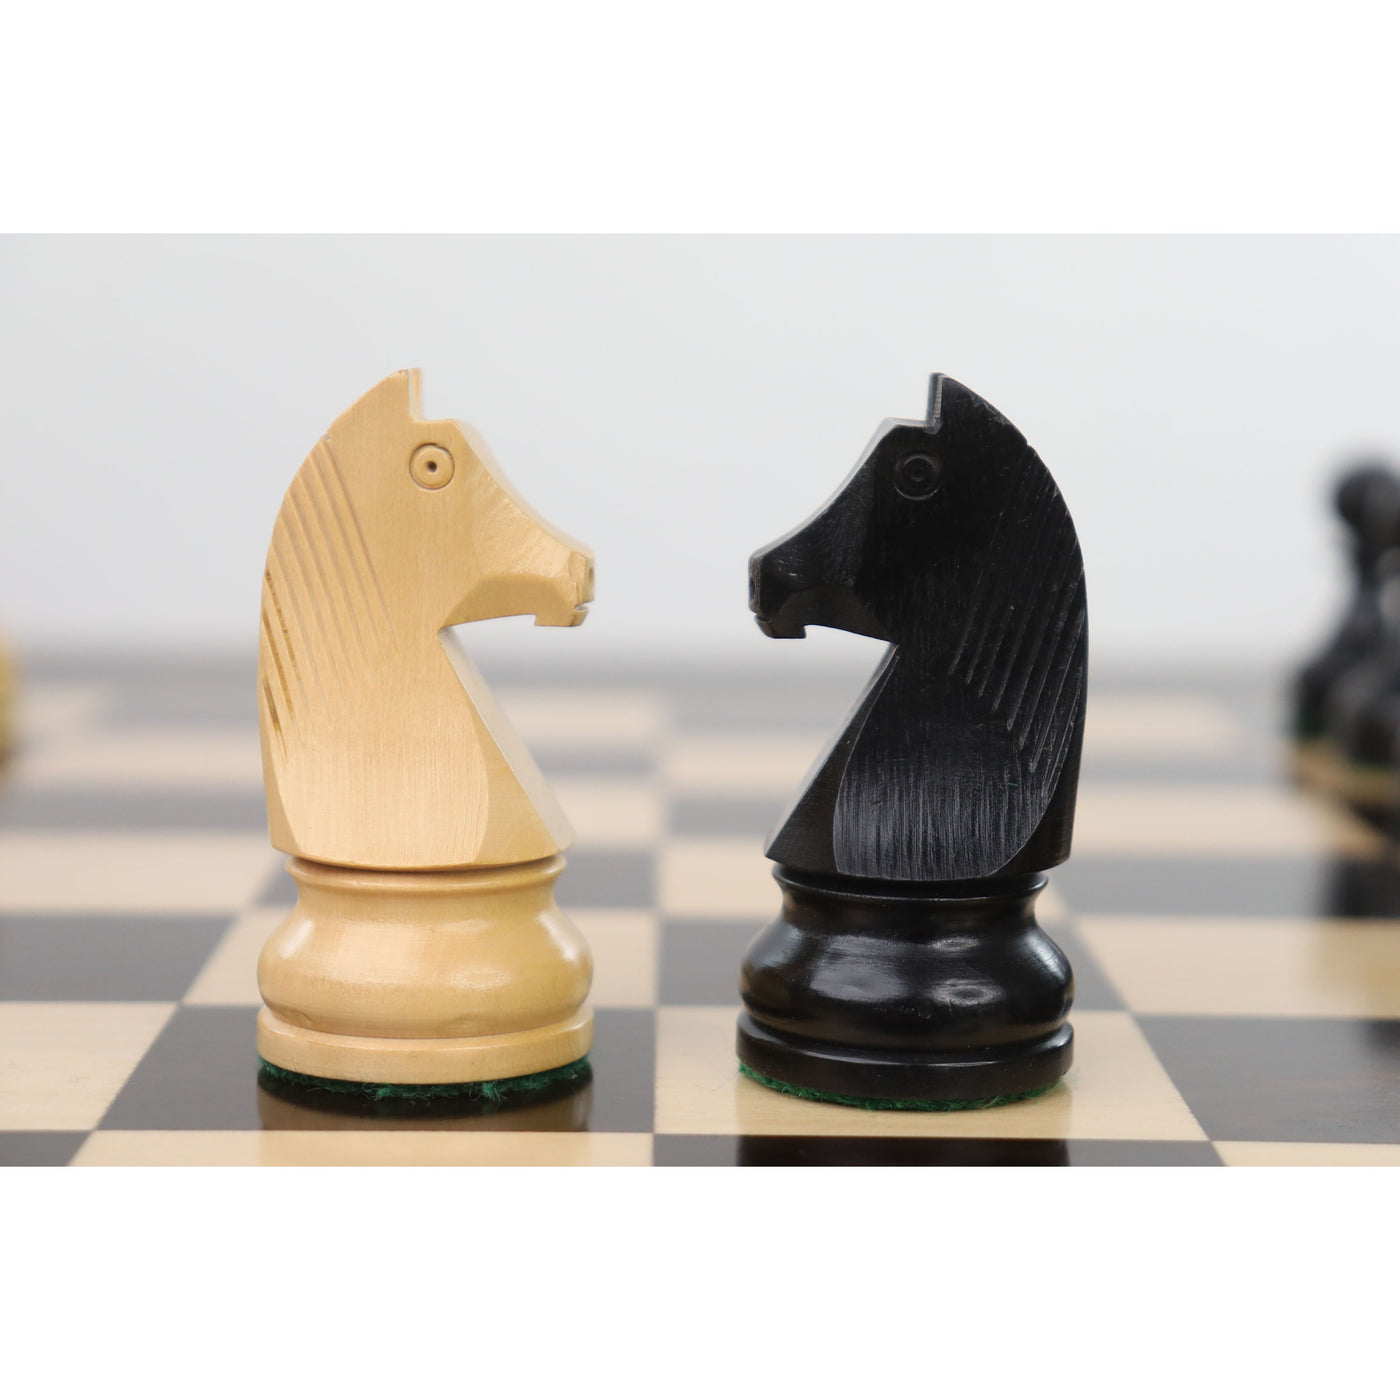 3.9" Tournament Chess Pieces set in Ebonised Weighted wood with Golden Rosewood Chess Pieces Storage Box